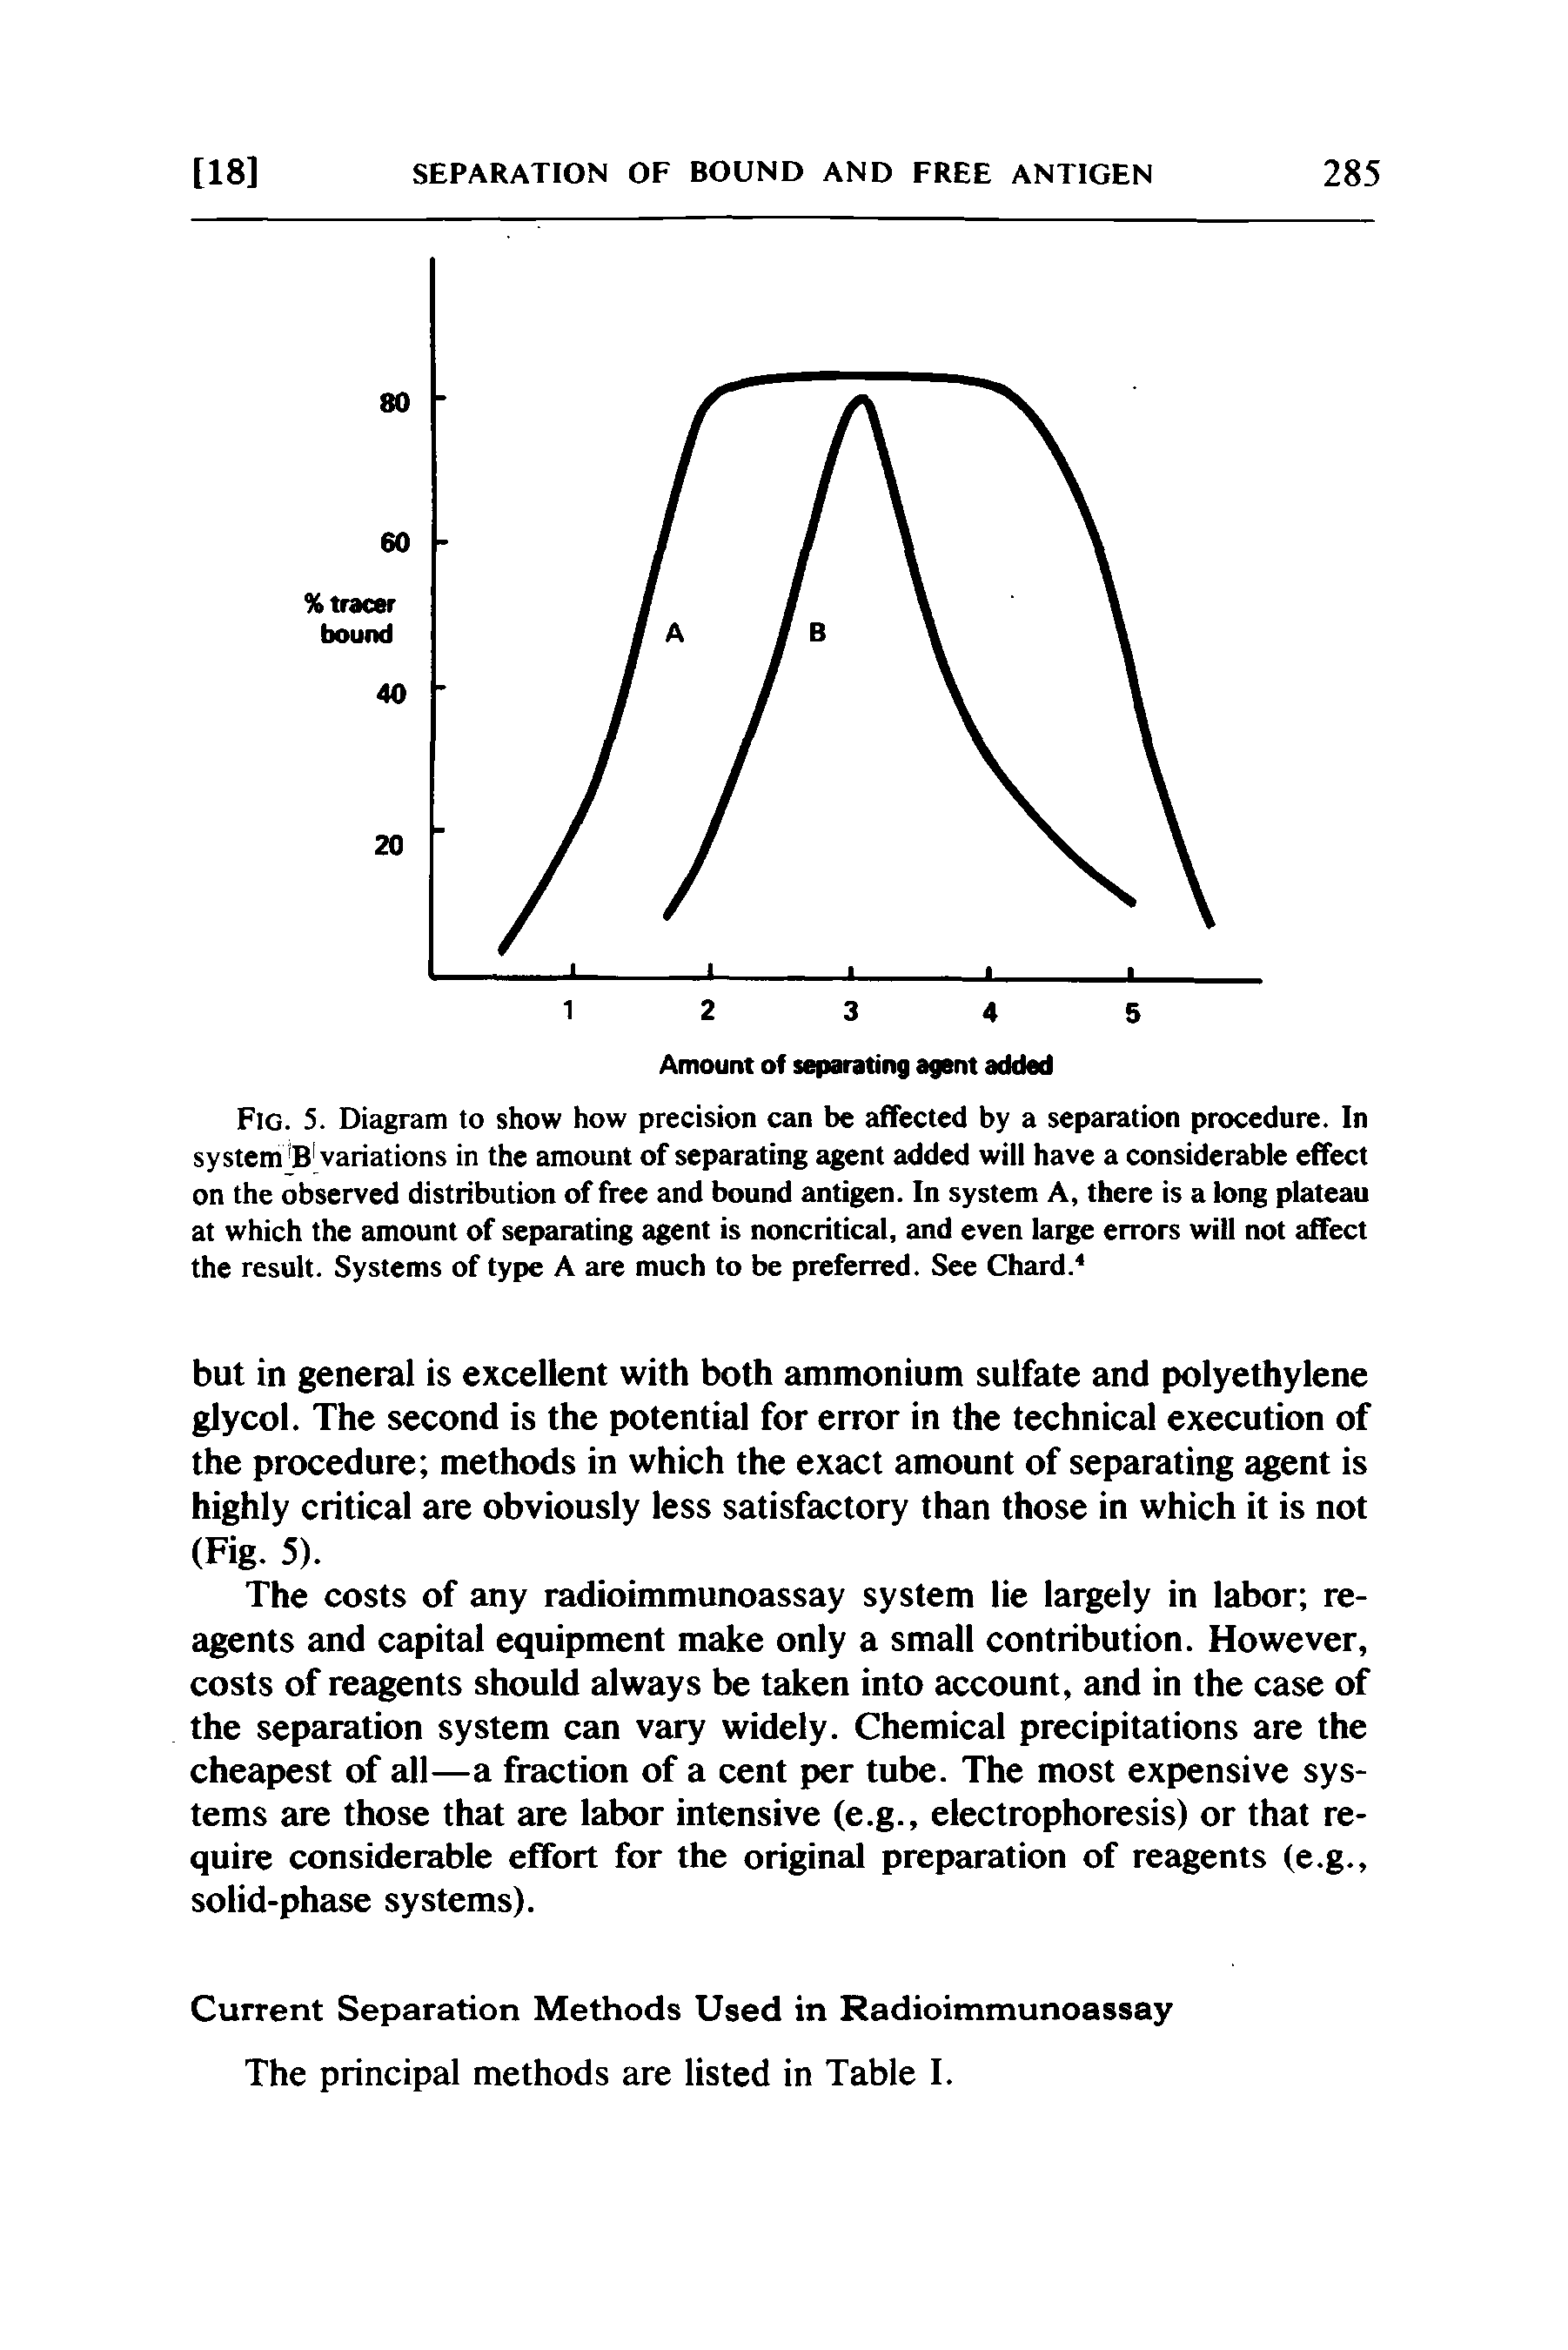 Fig. 5. Diagram to show how precision can be affected by a separation procedure. In system B variations in the amount of separating agent added will have a considerable effect on the observed distribution of free and bound antigen. In system A, there is a long plateau at which the amount of separating agent is noncritical, and even large errors will not affect the result. Systems of type A are much to be preferred. See Chard. ...